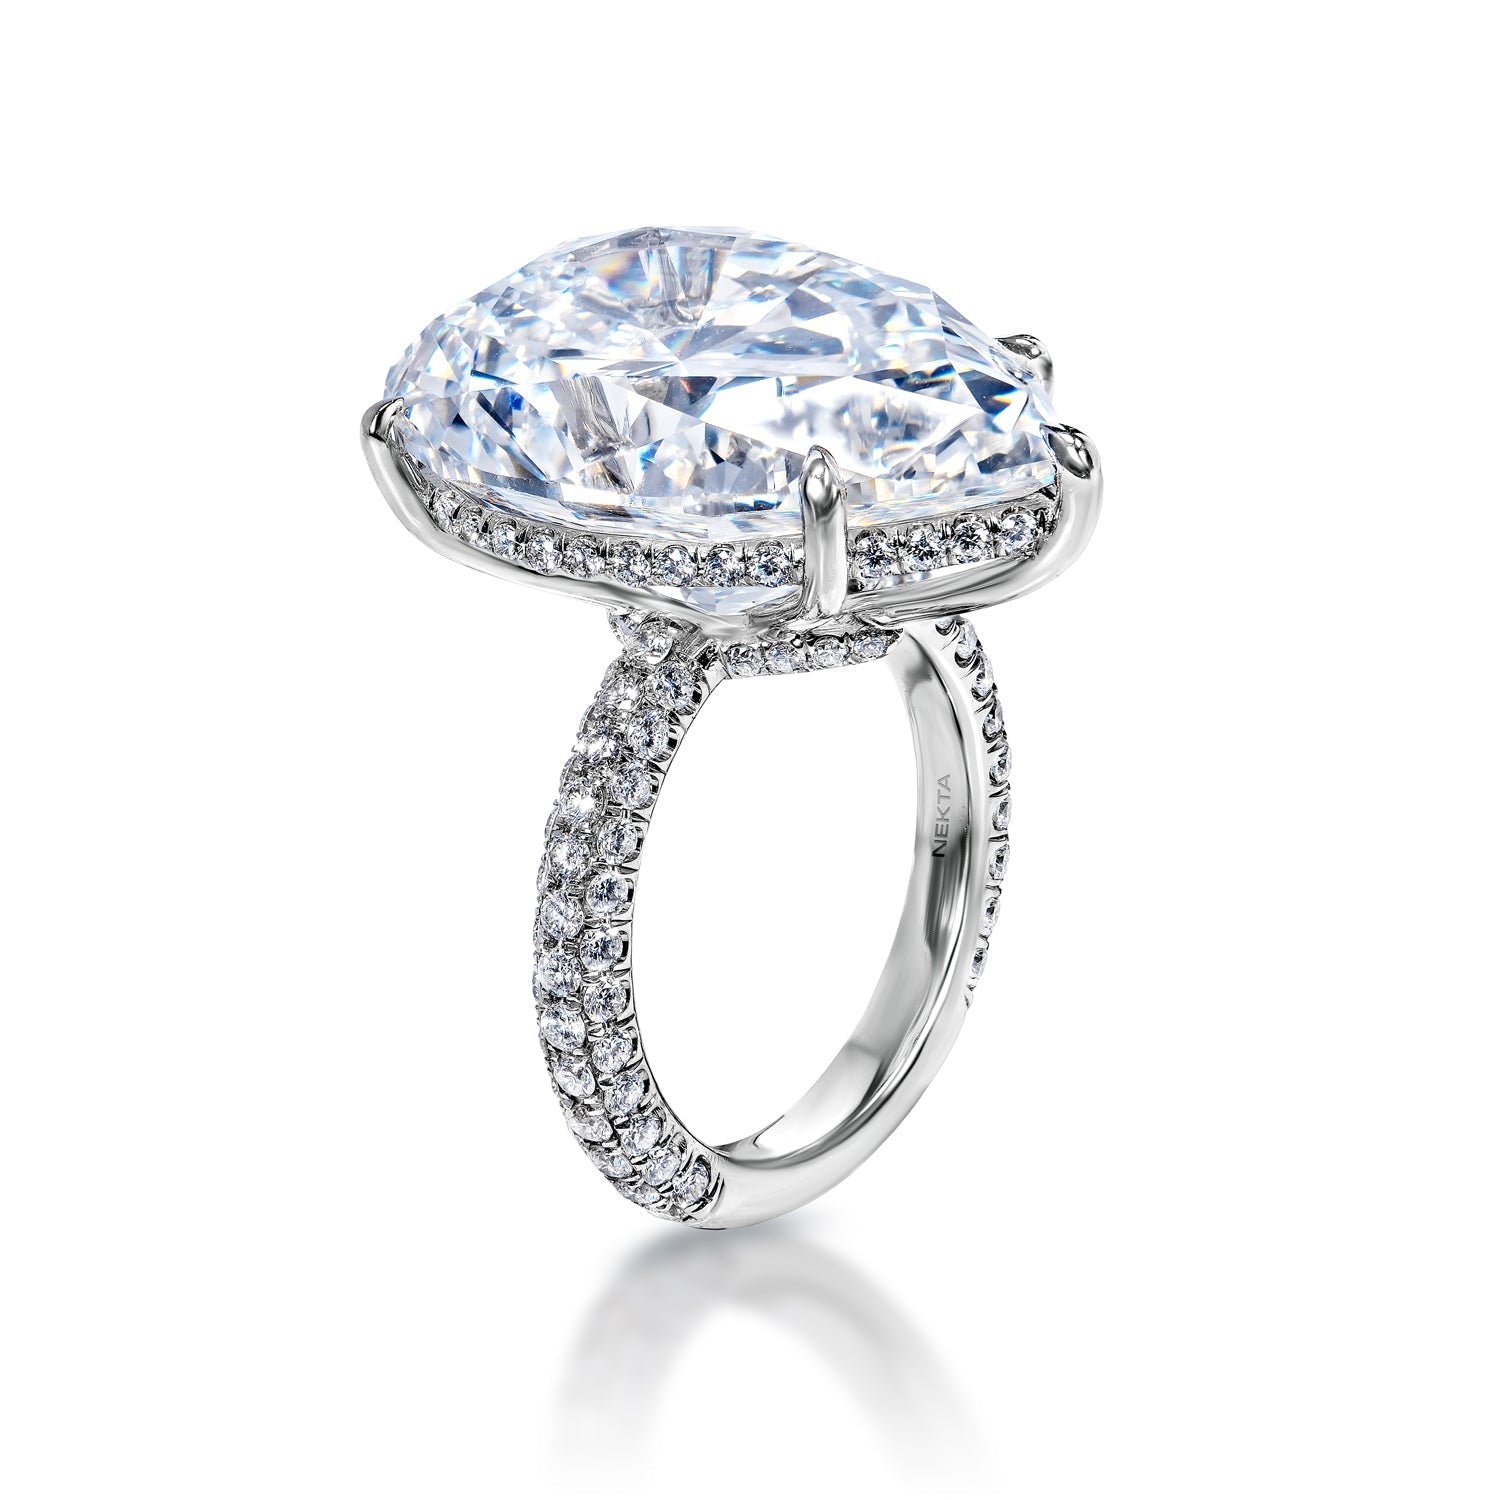 Valeria 24 Carat F VVS2 Pear Shape Diamond Engagement Ring in Platinum. GIA Certified Side View